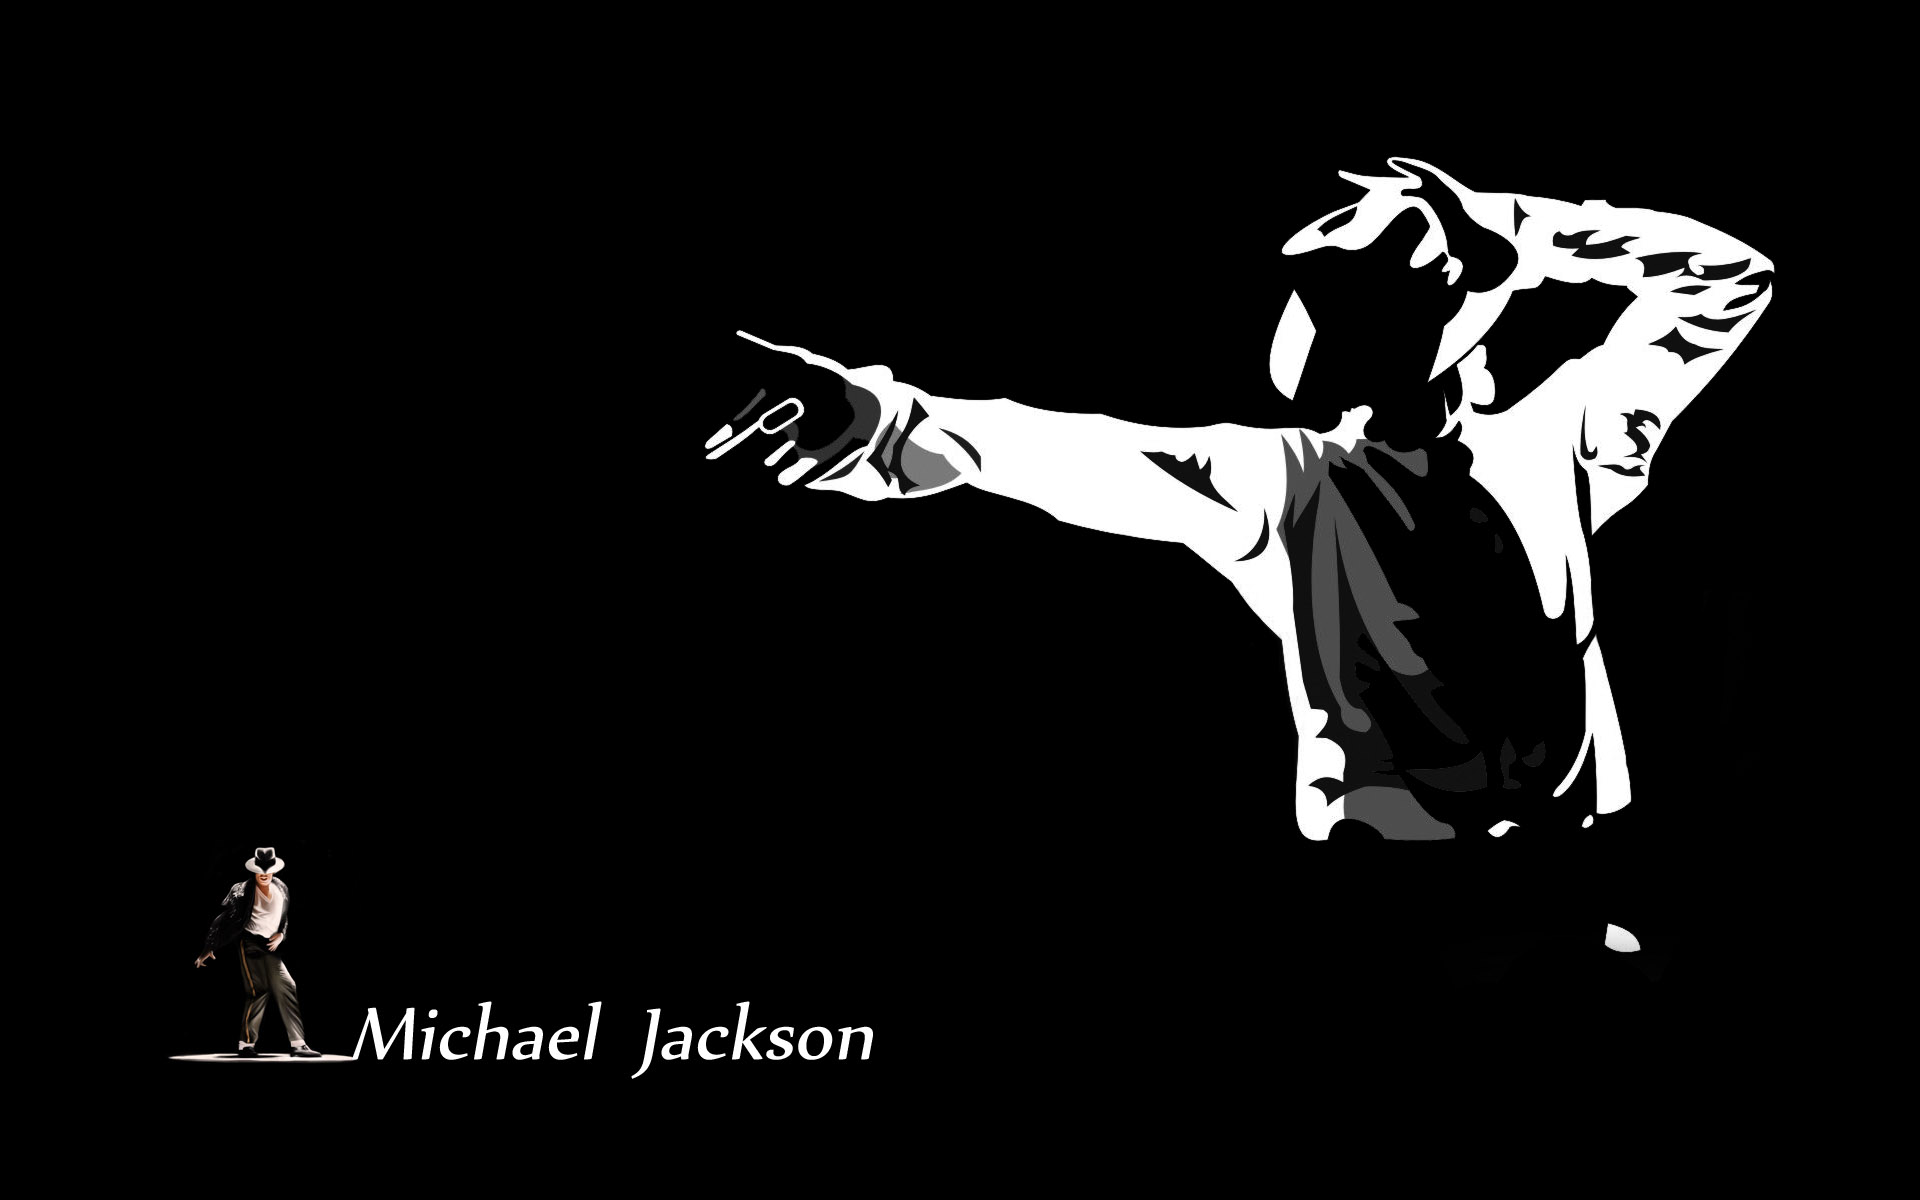 michael jackson wallpaper,font,black and white,graphic design,photography